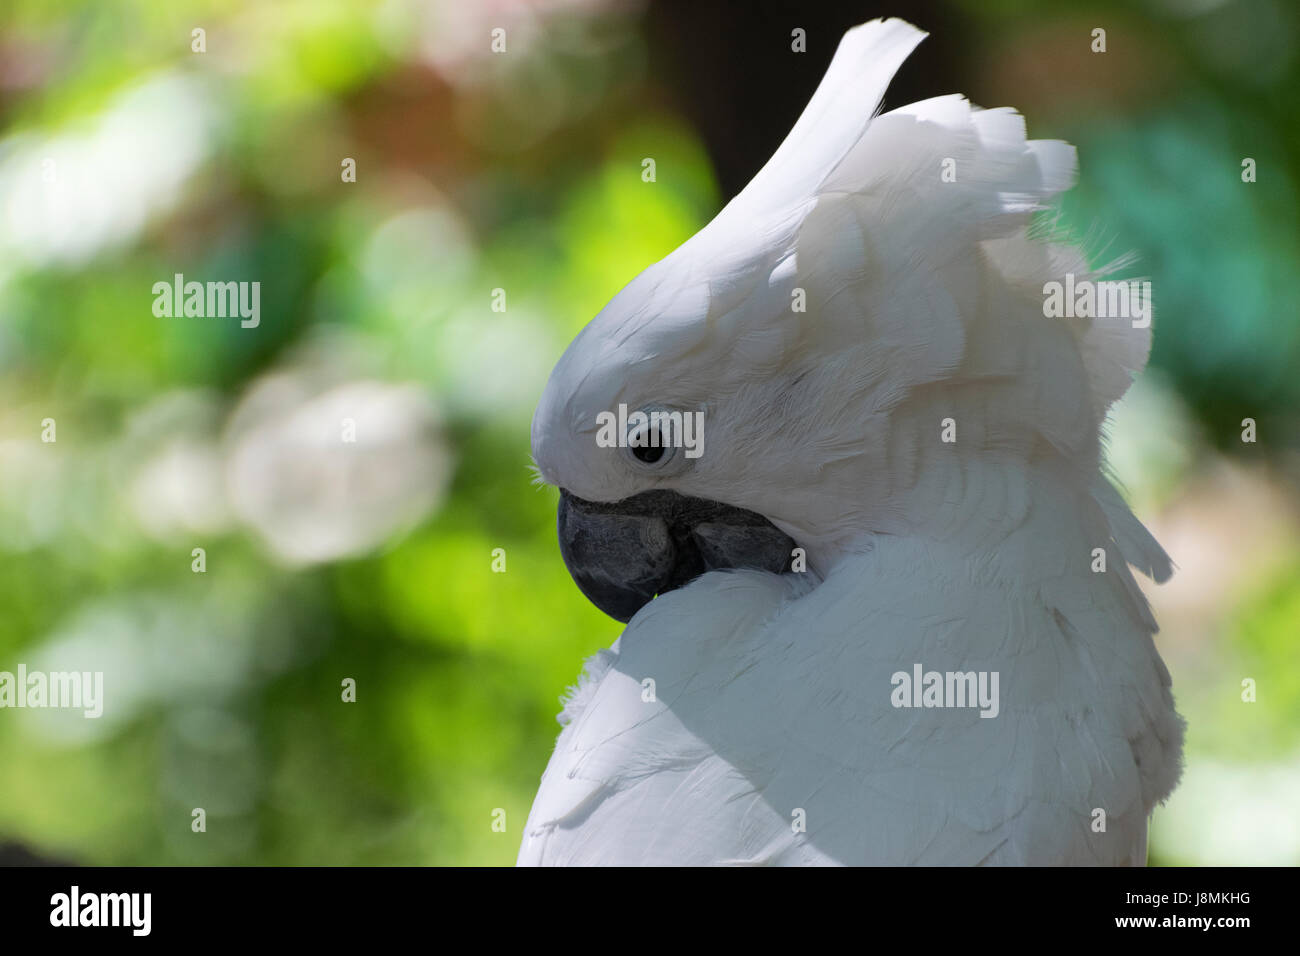 Closeup of a White Cockatoo bird as it uses its powerful, black beak to clean its beautiful white feathers during preening. Stock Photo